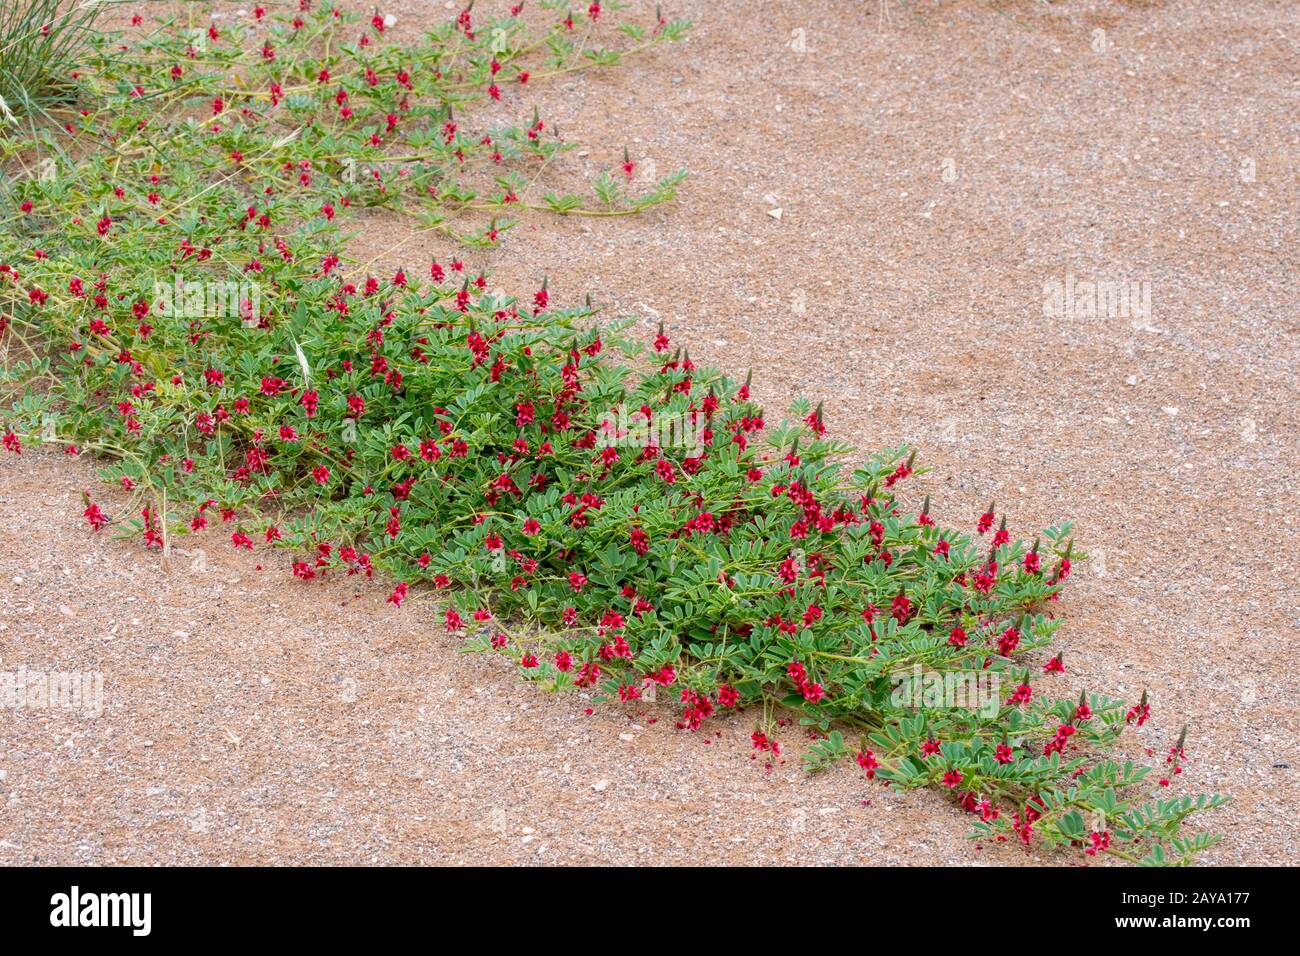 After a rain, a plant in the pea family is flowering in the Huanib River Valley in northern Damaraland and Kaokoland, Namibia. Stock Photo